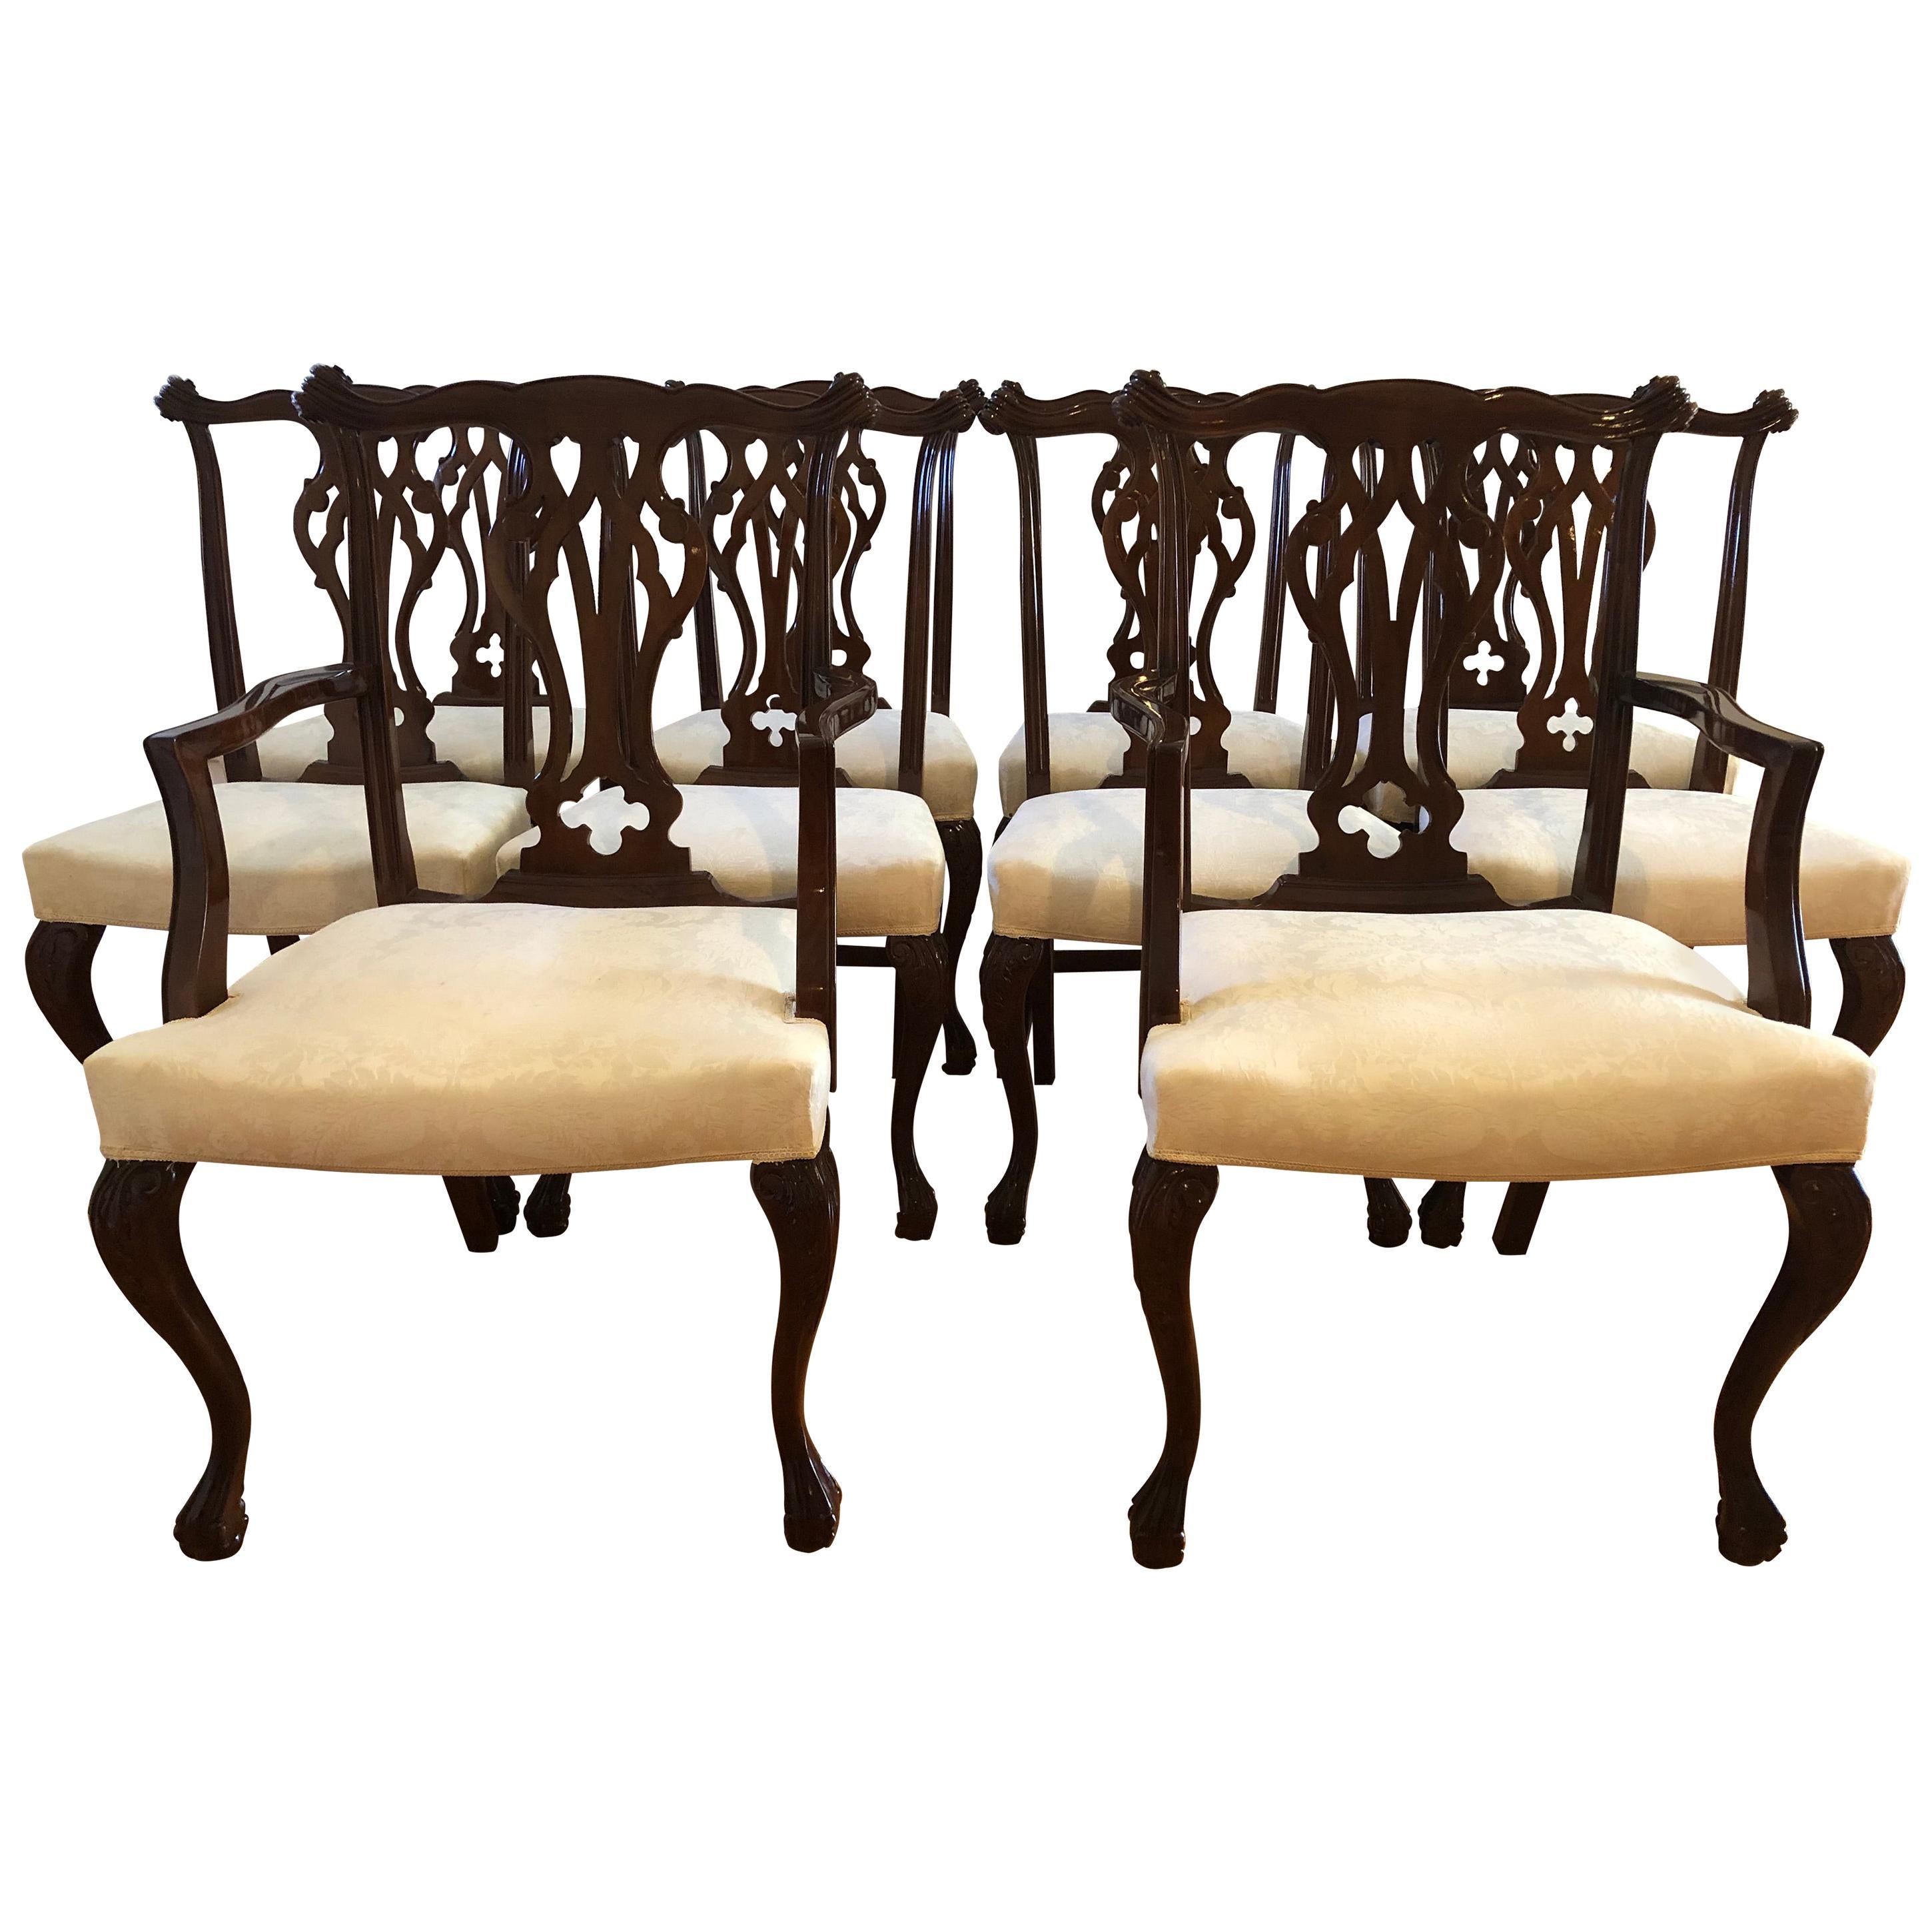 Resplendent Set of 10 Chippendale Style Dining Chairs